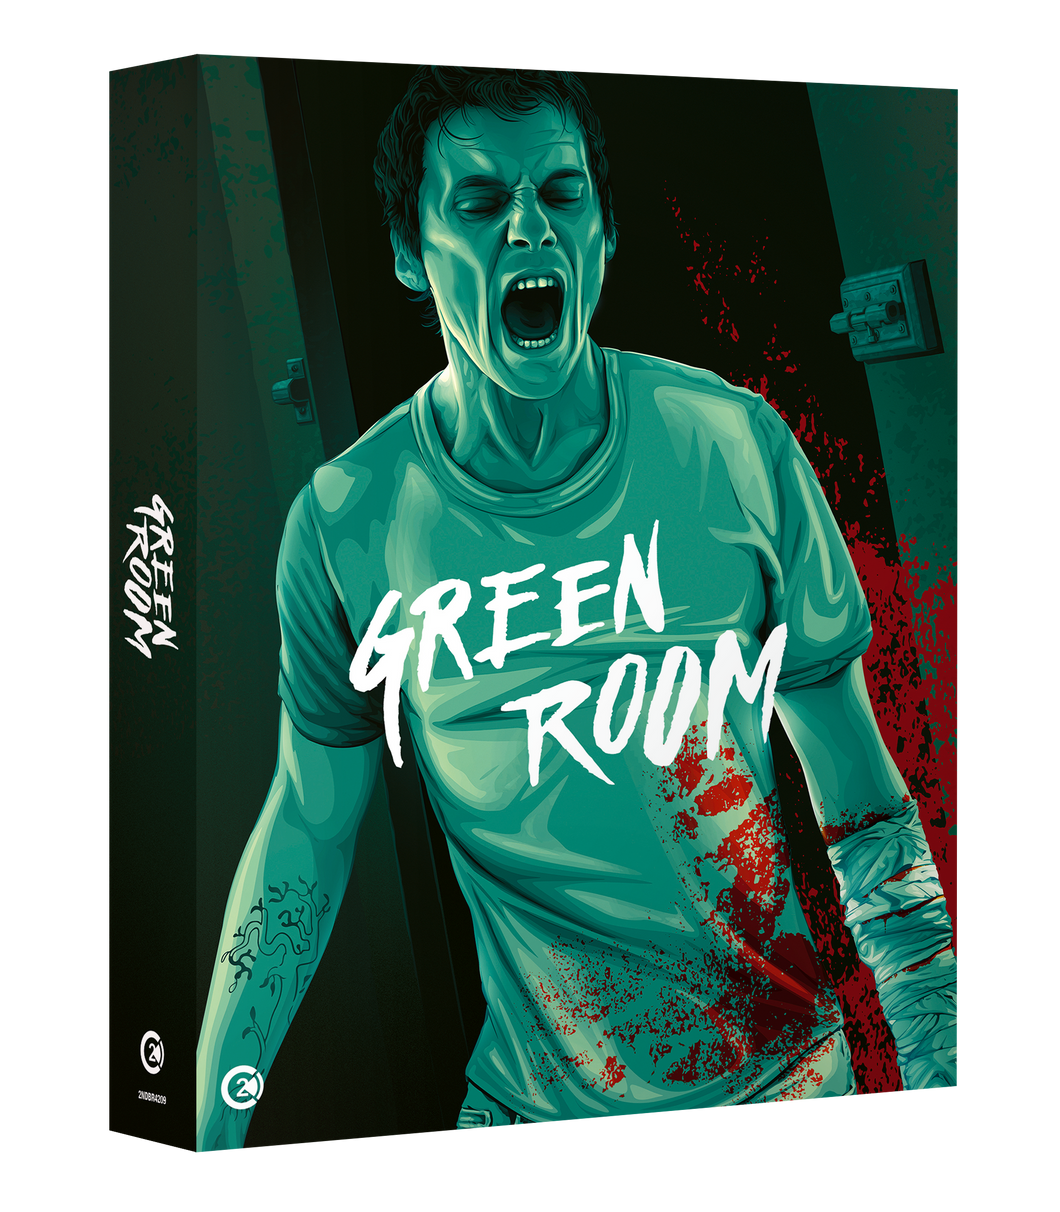 Green Room Limited Edition 4k Uhd And Blu Ray Second Sight Films